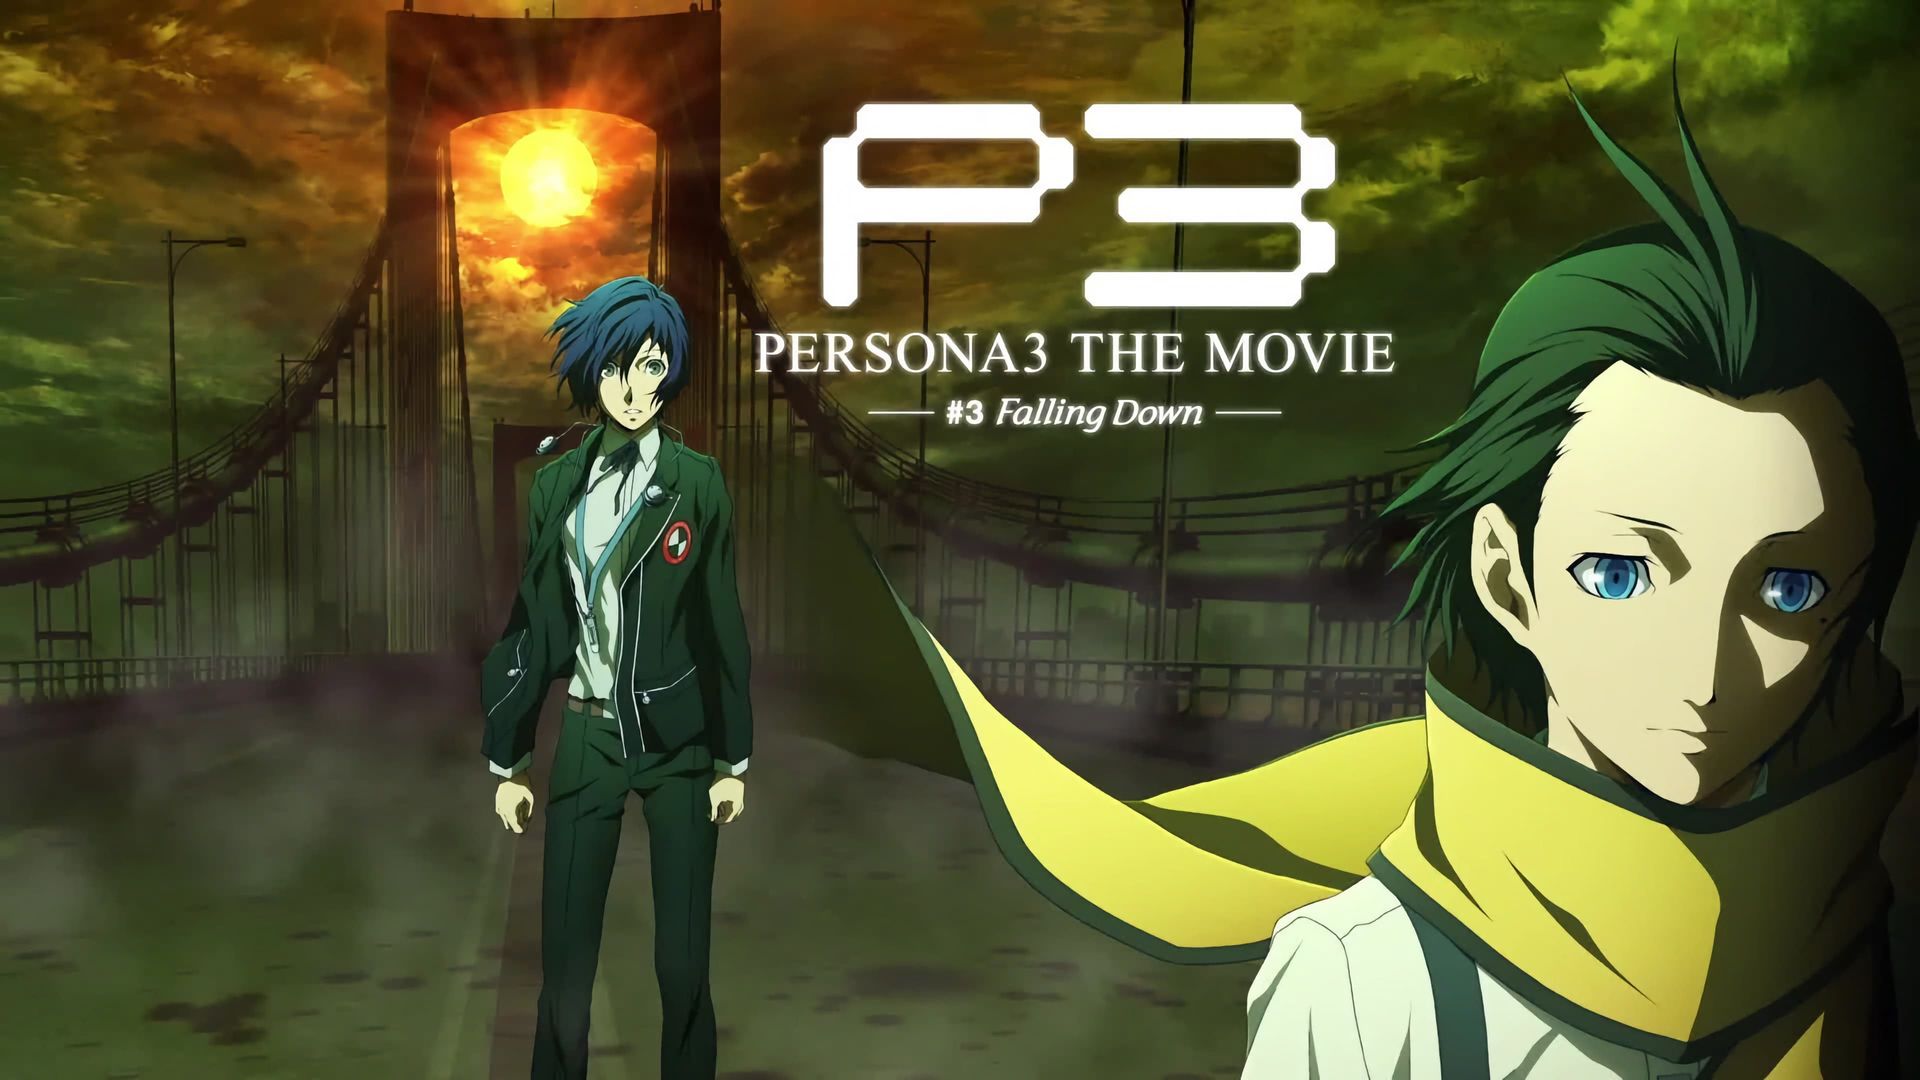 PERSONA3 the Movie #3 Falling Down background